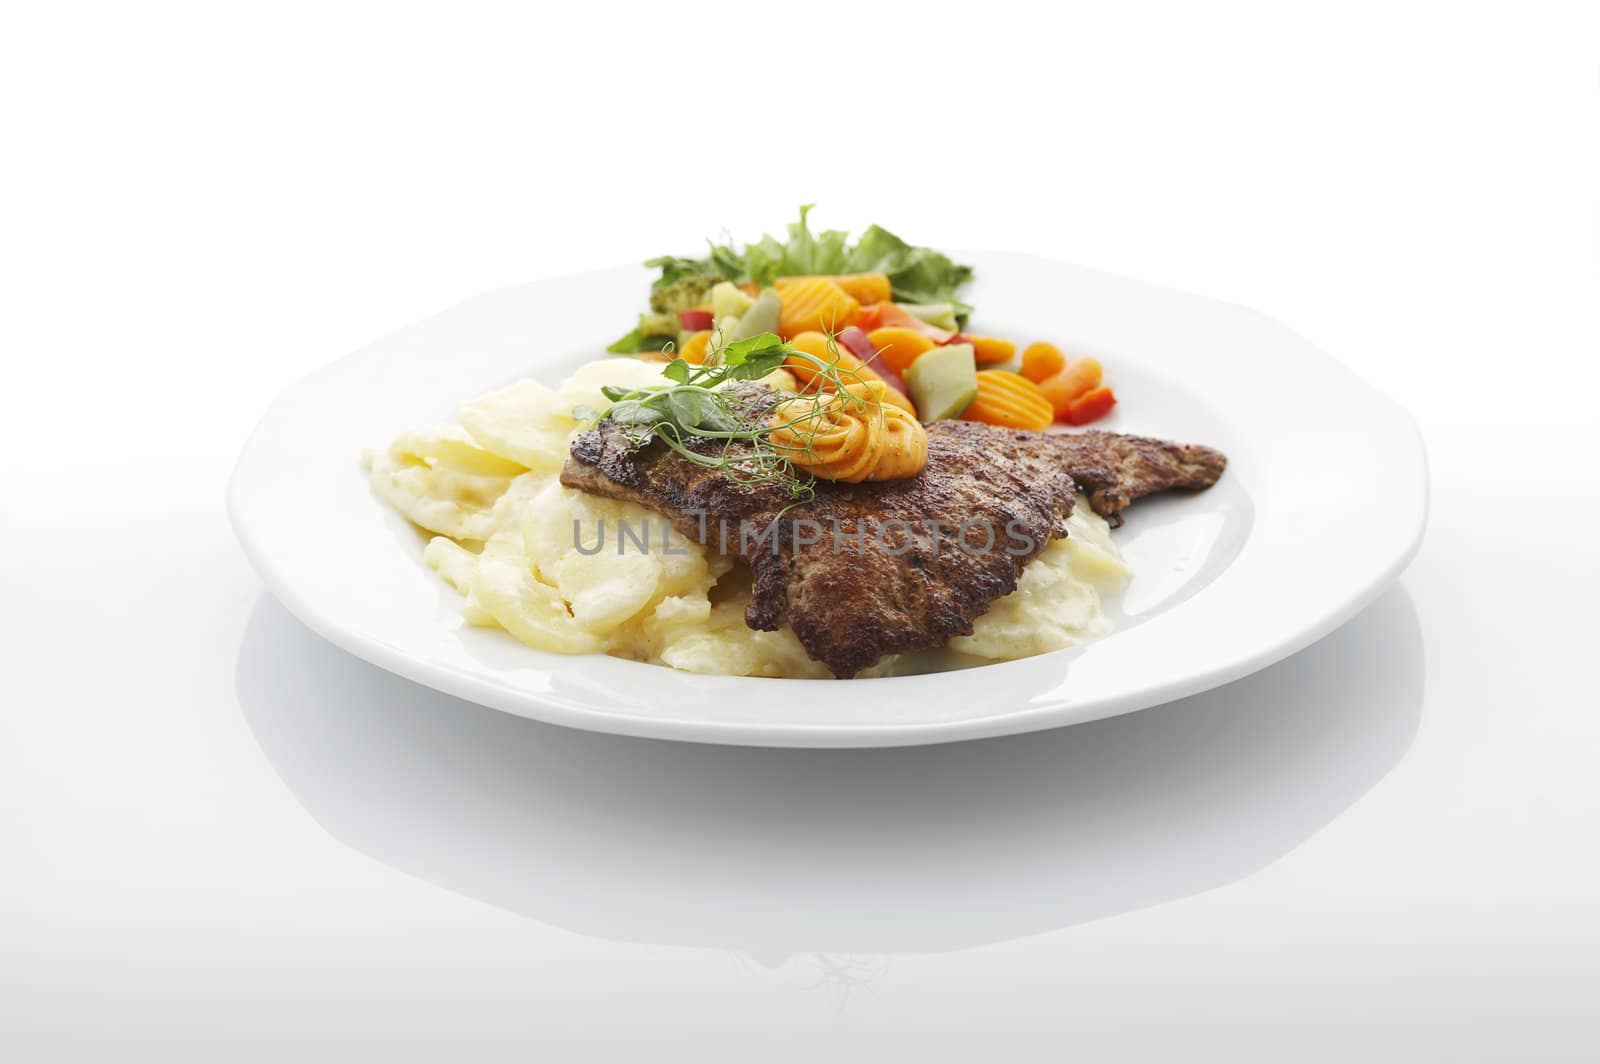 Steak and creamy potatoes on the white plate